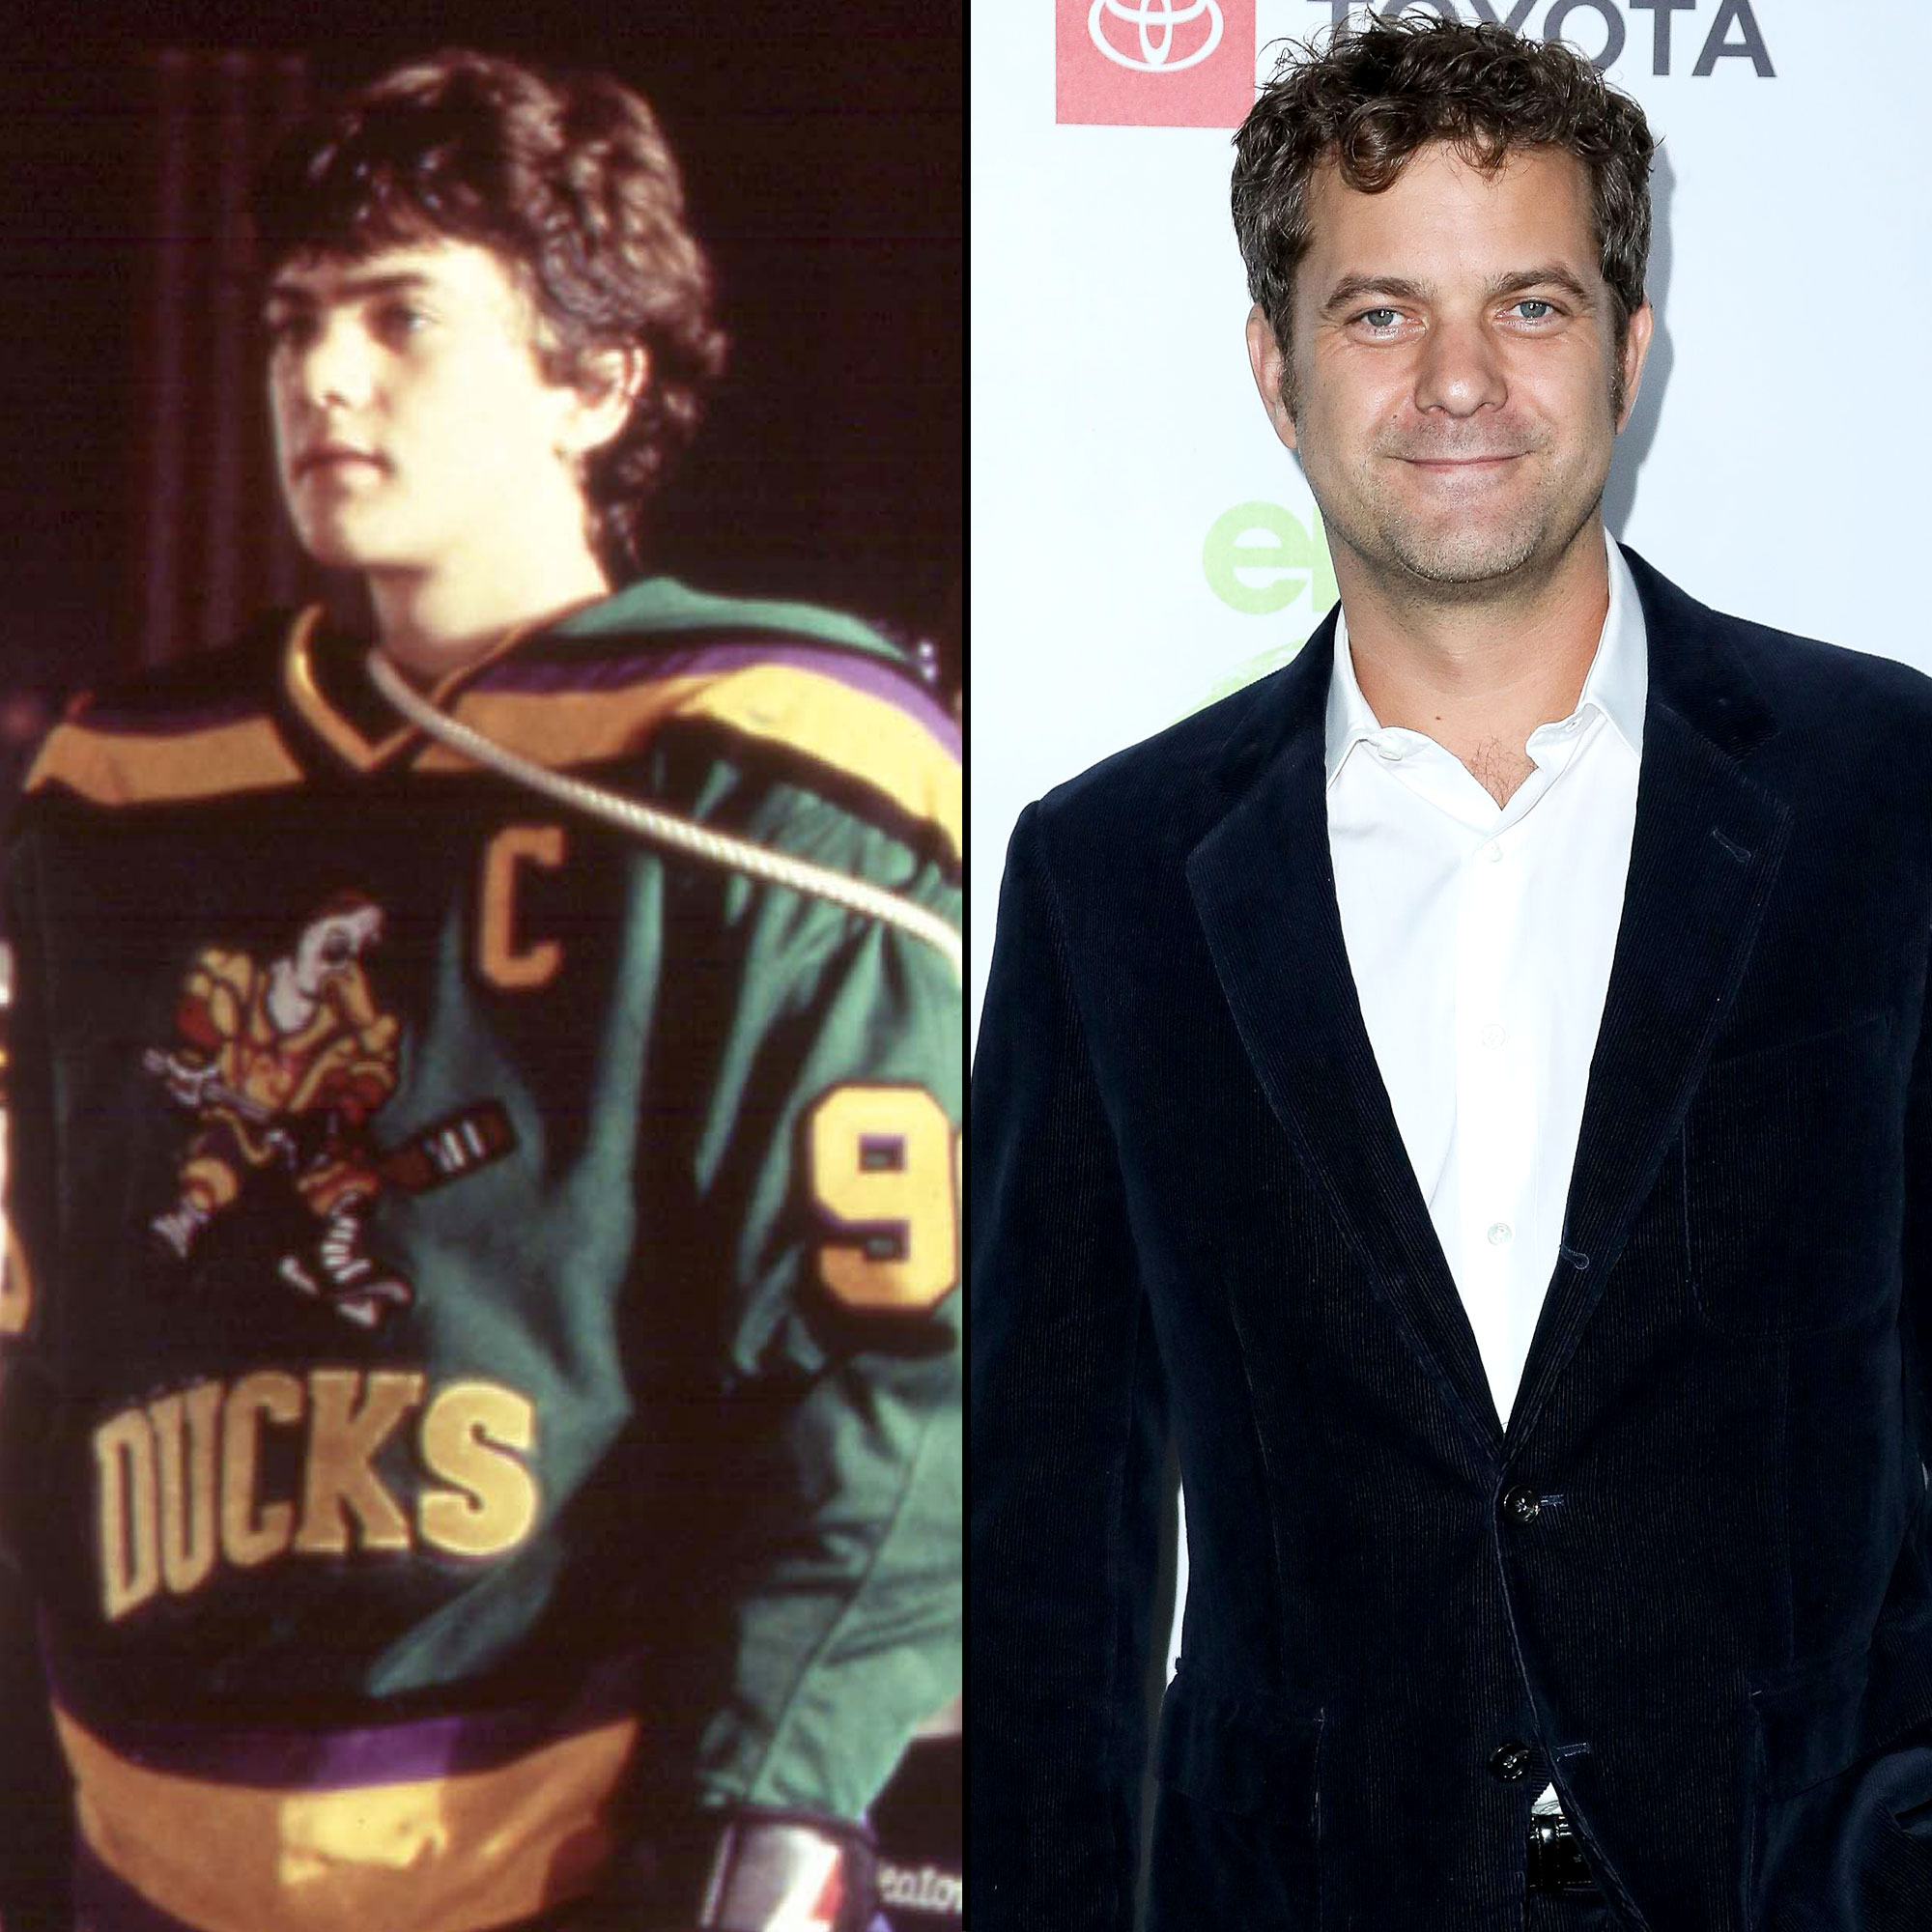 LOOK: The Original Mighty Ducks Reunited, But Can You Recognize Who's Who?  - FanBuzz